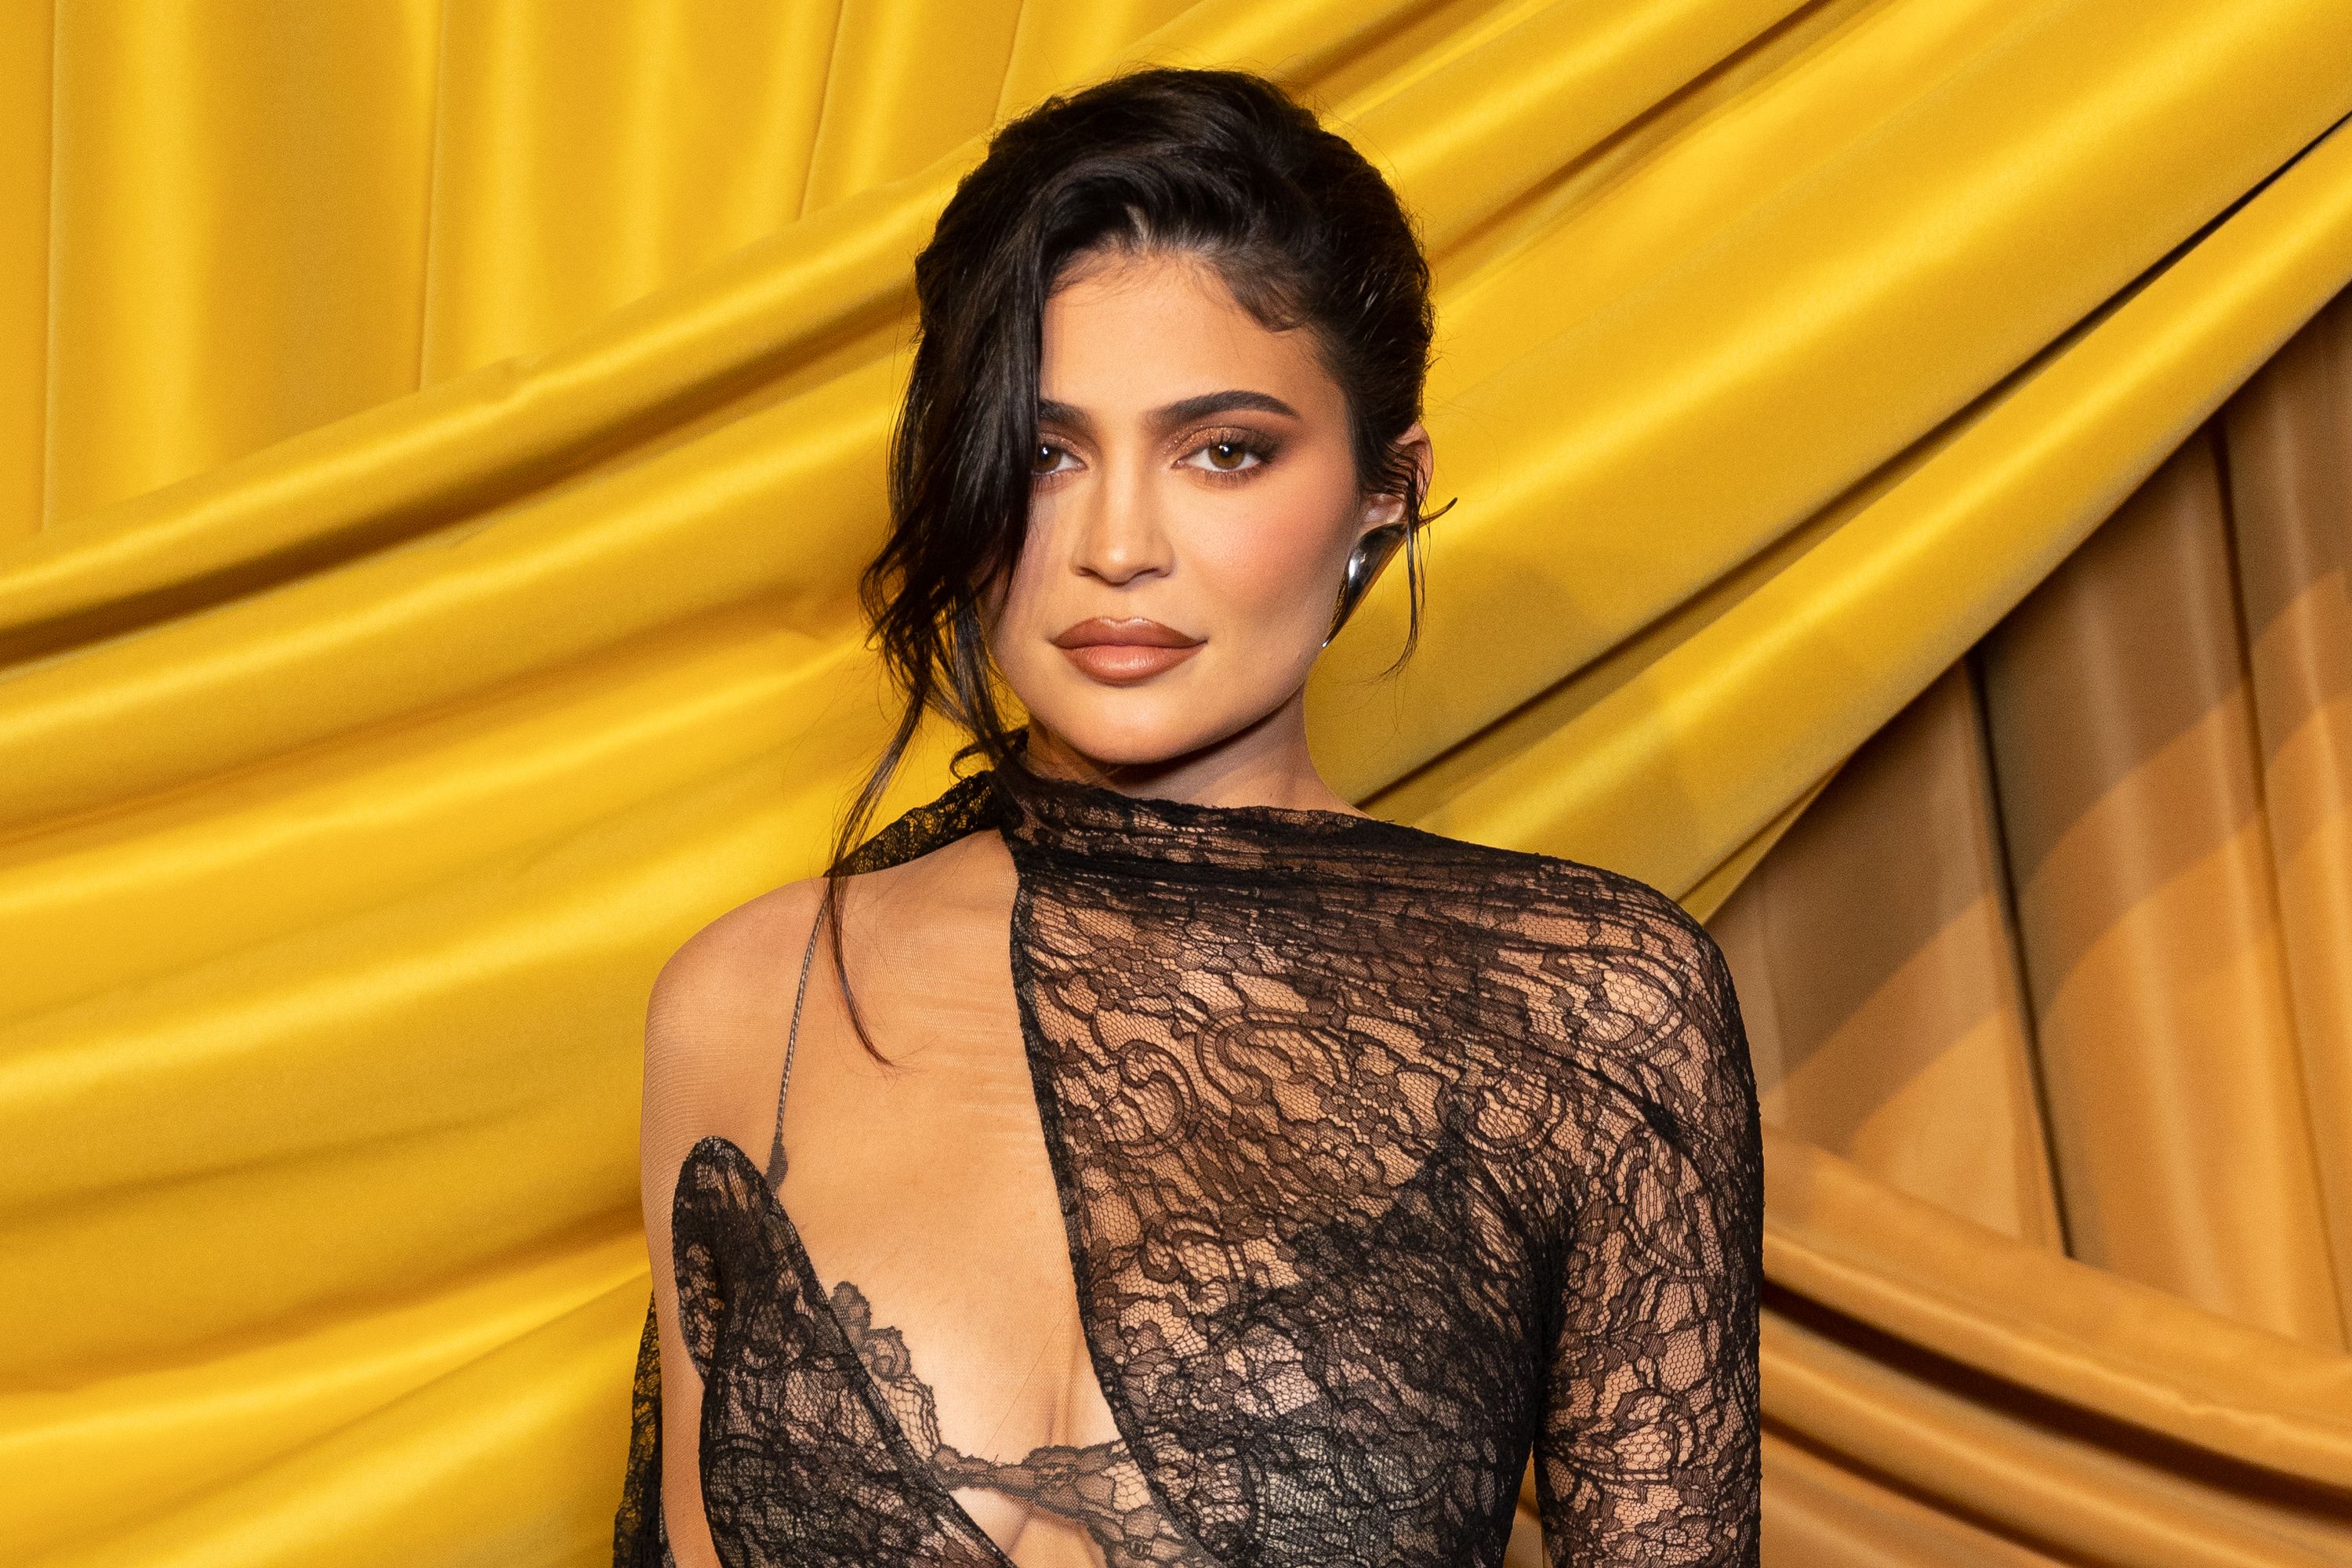 Kylie Jenner Wears Two Daring Corset Outfits, Photos